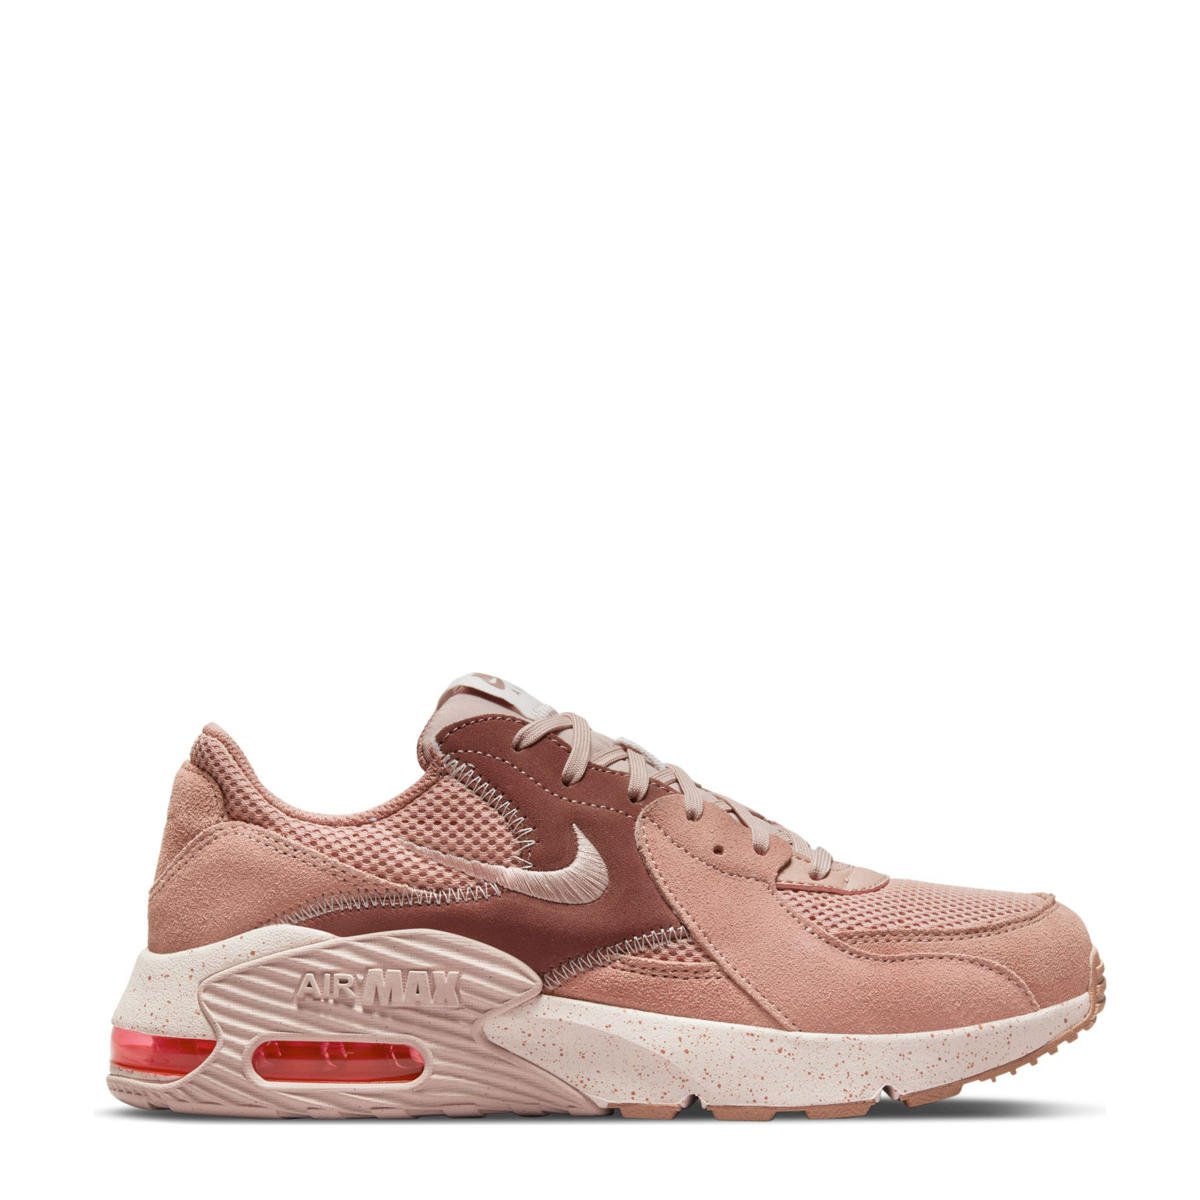 Controversieel Labe Voorzitter Nike Air Max Excee sneakers oudroze/roze | wehkamp